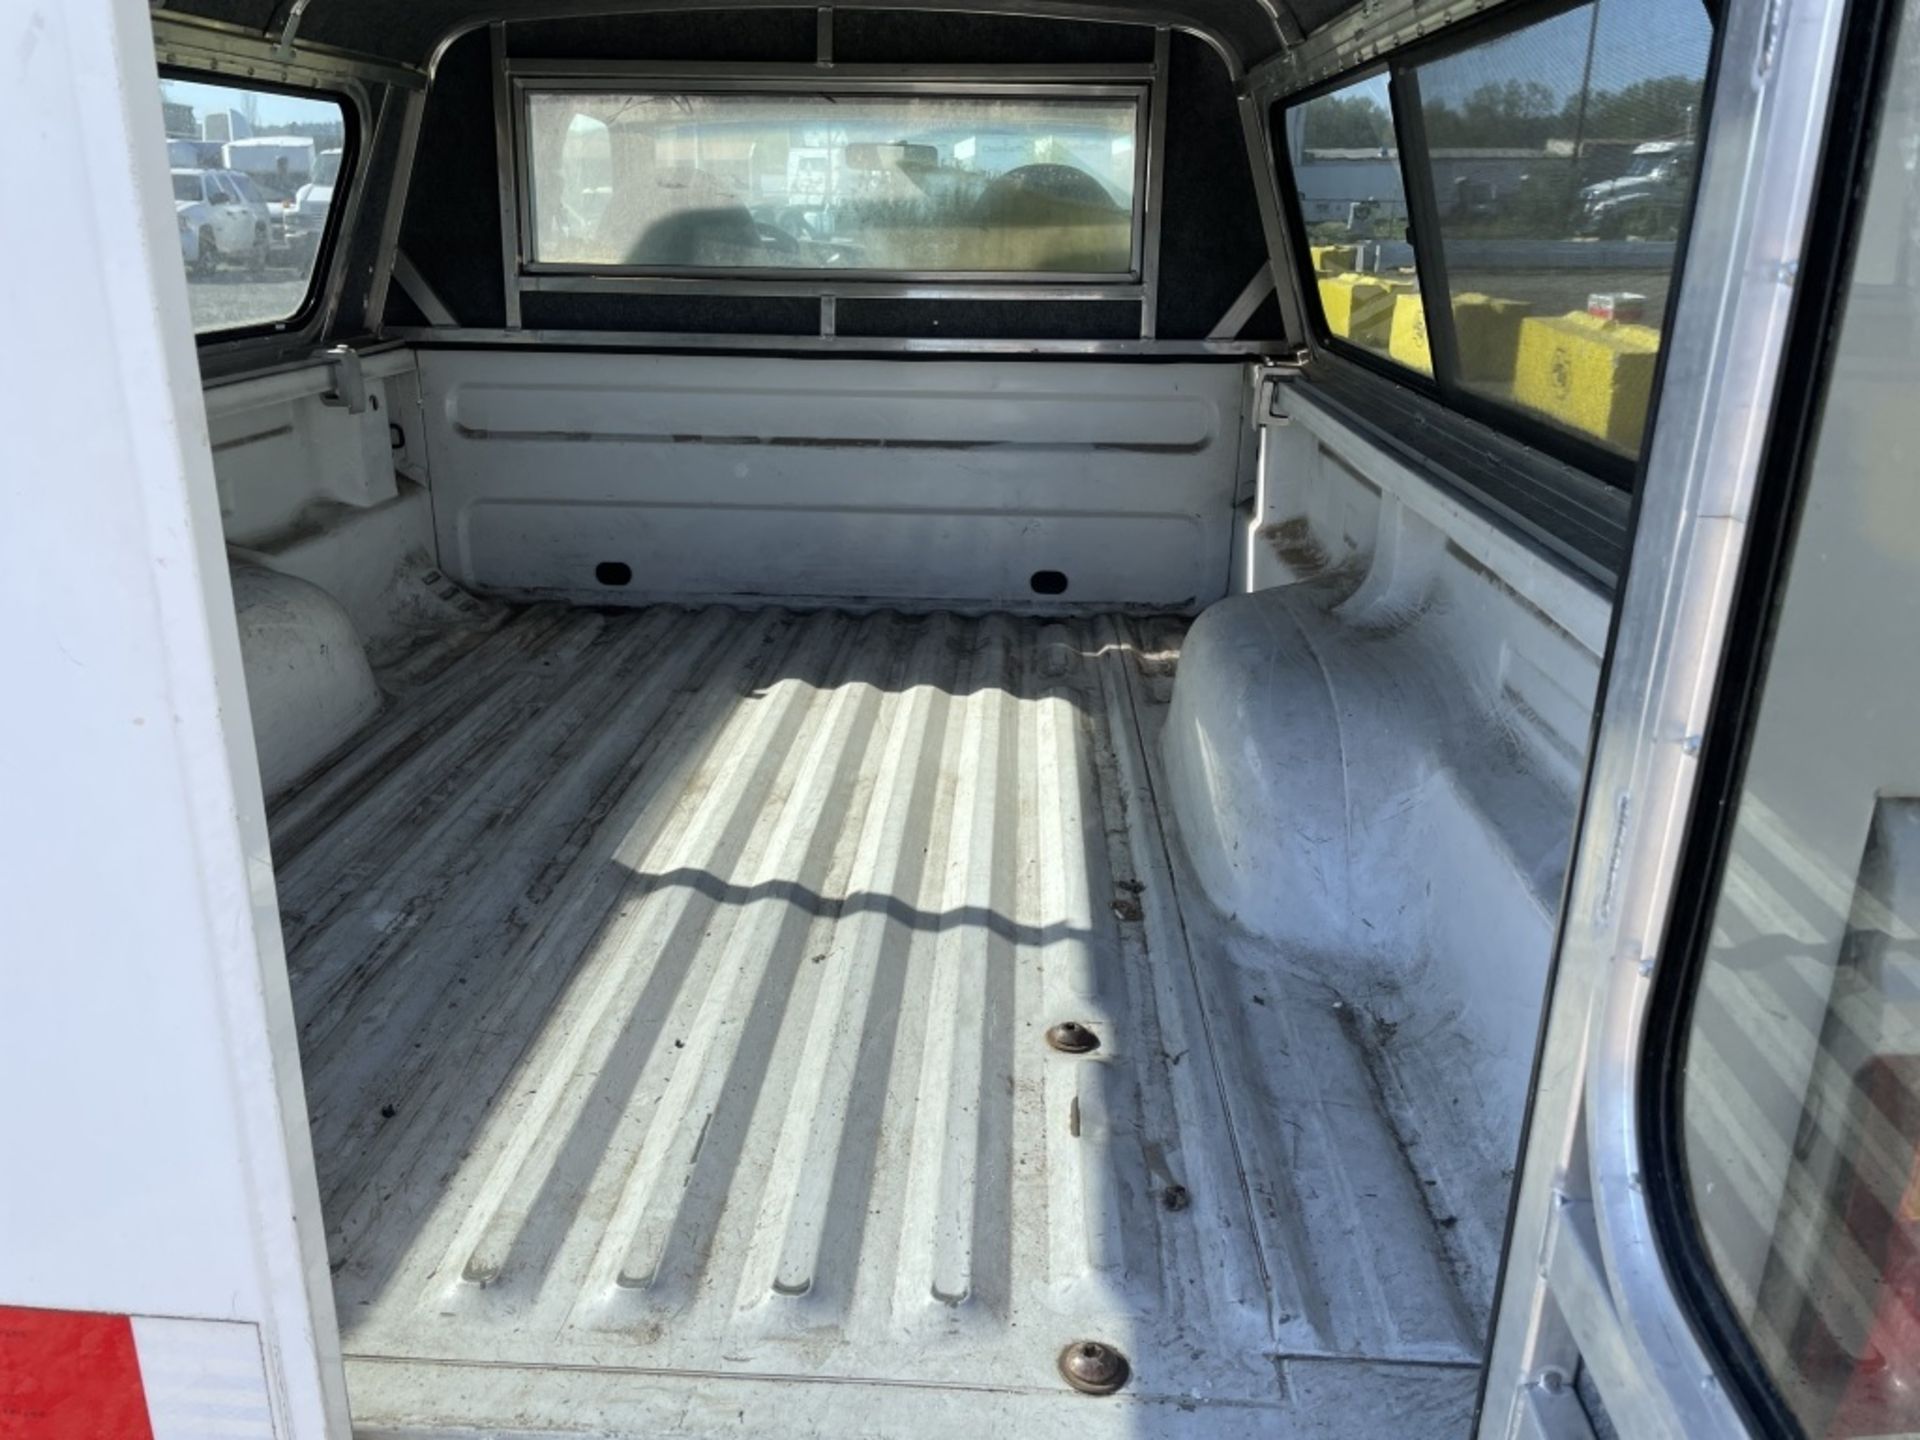 1998 Ford Ranger Extra Cab Pickup - Image 5 of 14